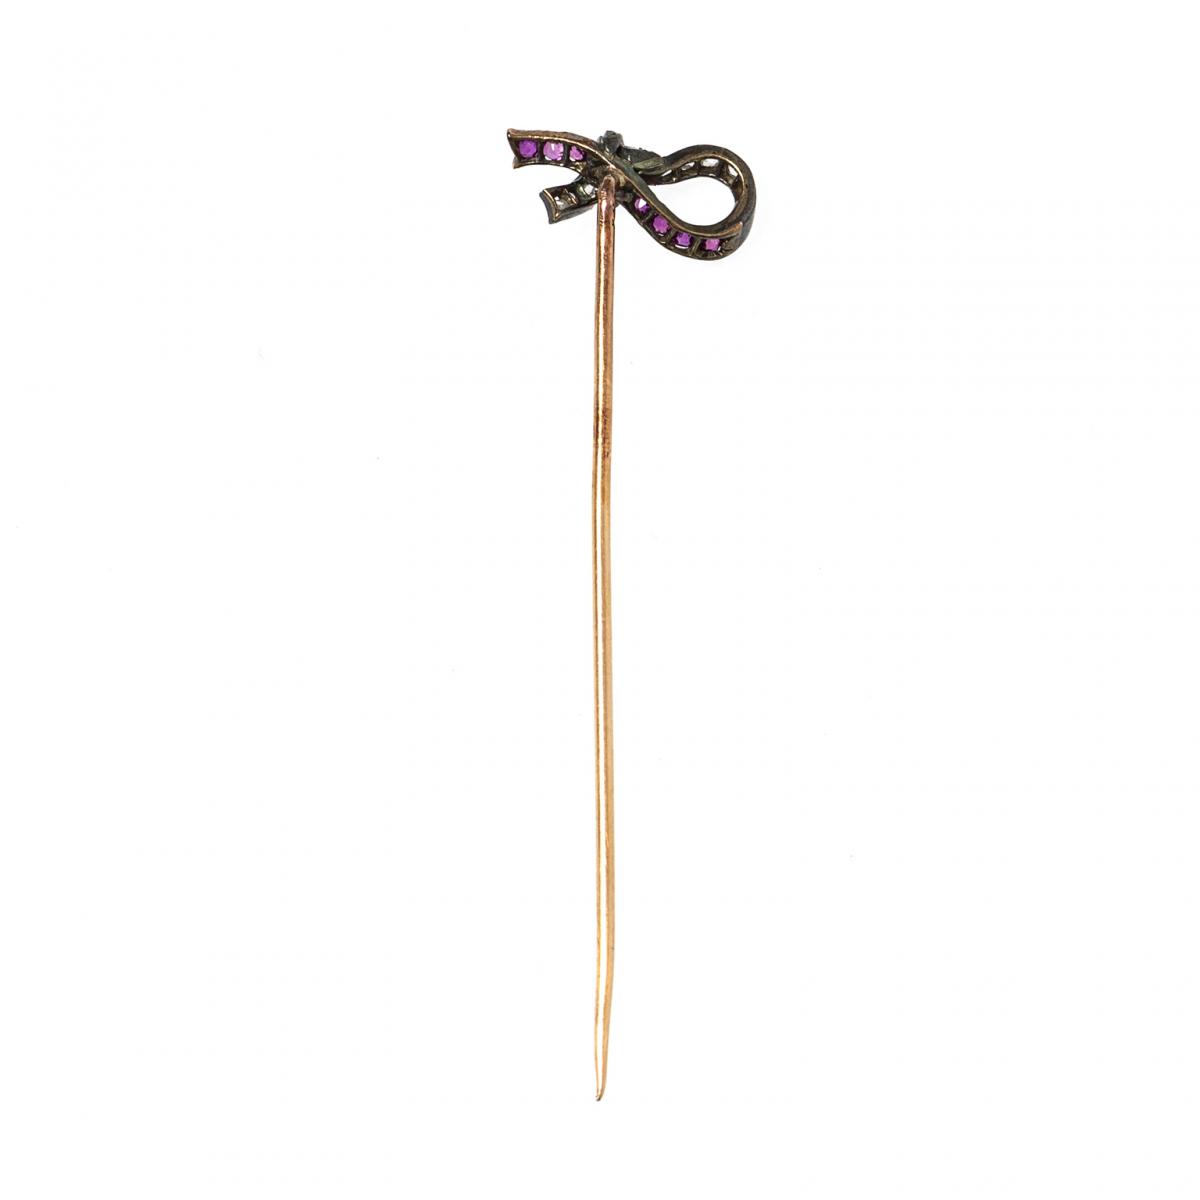 Antique Tie Pin of a Tied Ribbon with Diamonds & Burma Rubies, French circa 1880.